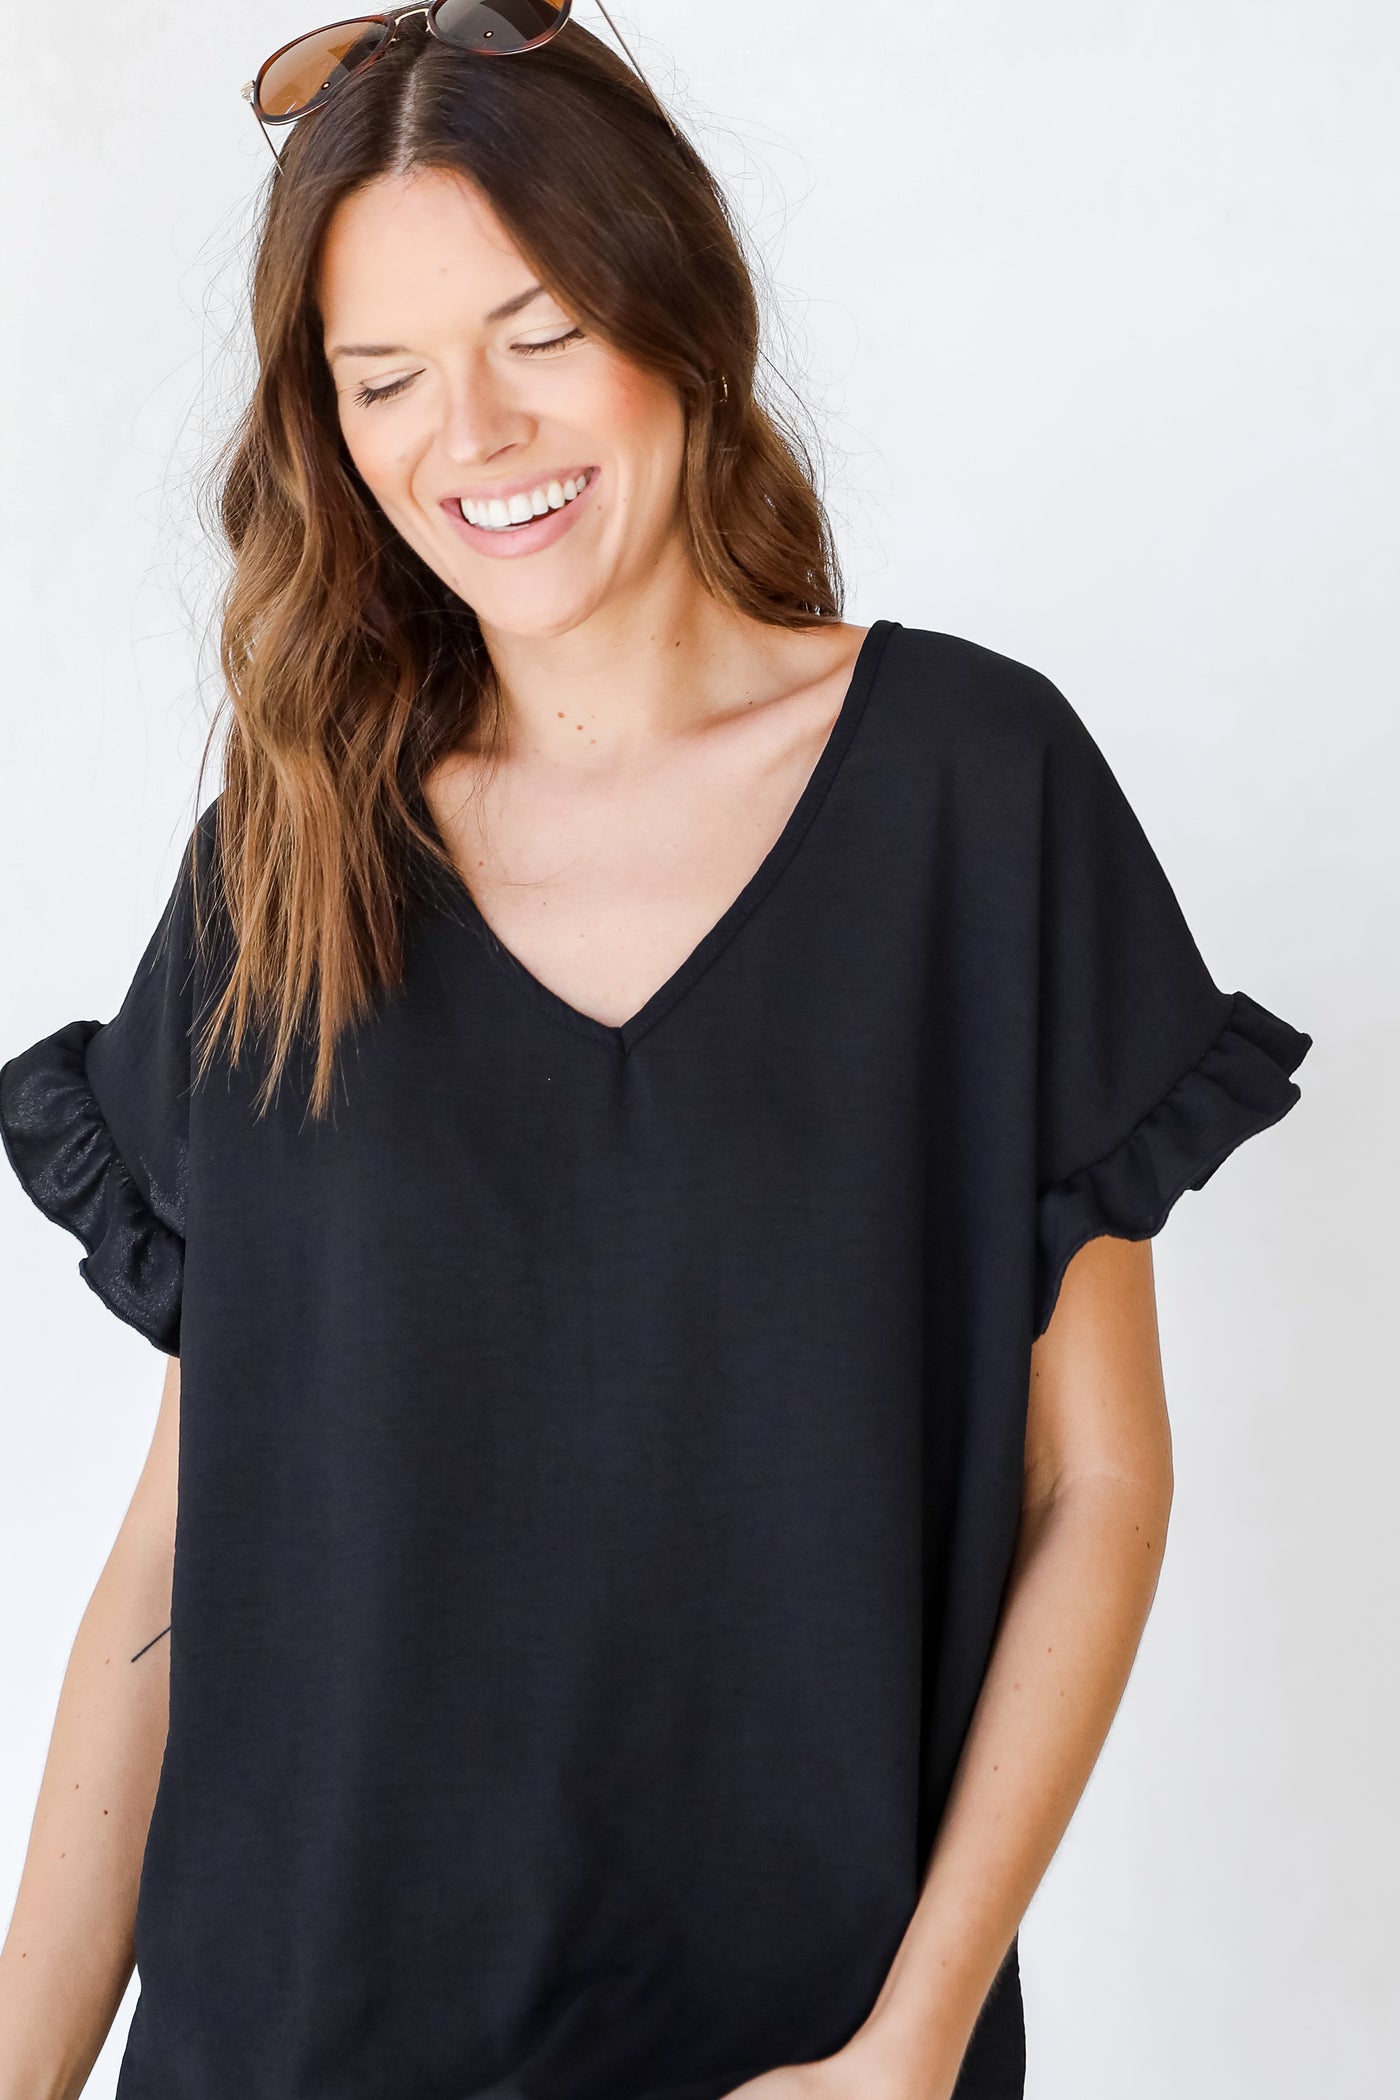 Ruffle Sleeve Blouse in black front view